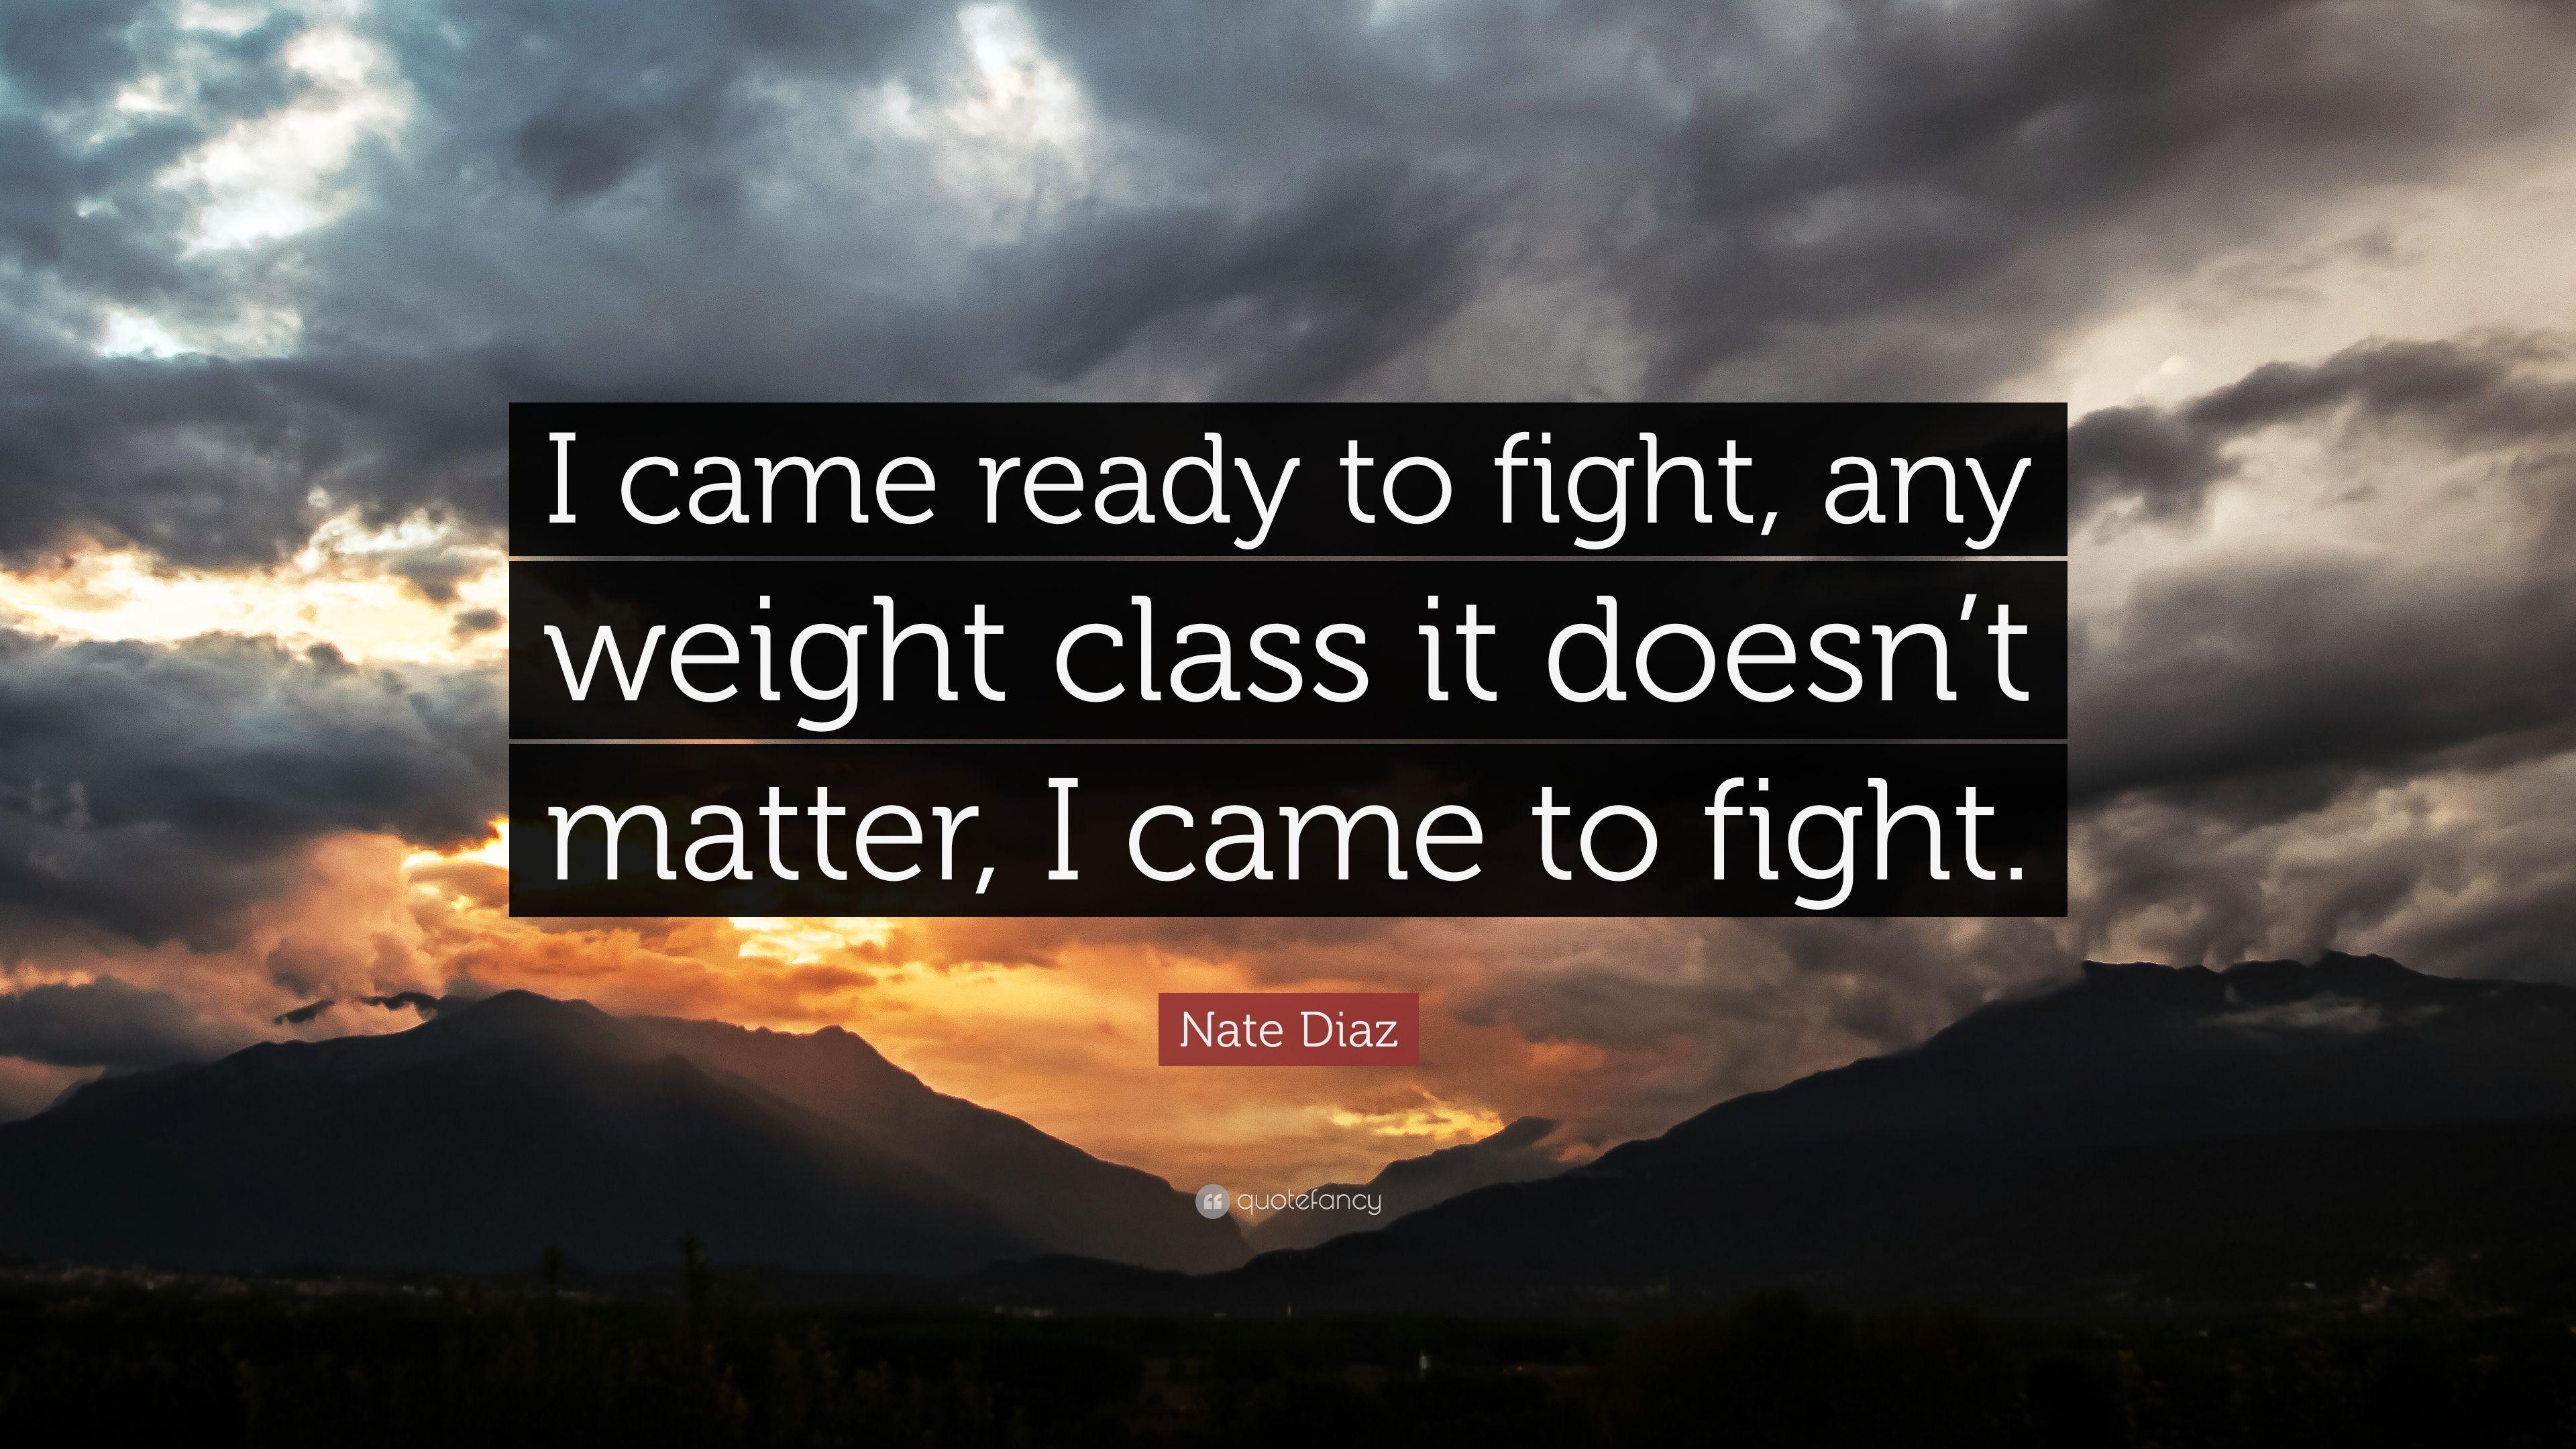 Nate Diaz Quote: “I came ready to fight, any weight class it doesn